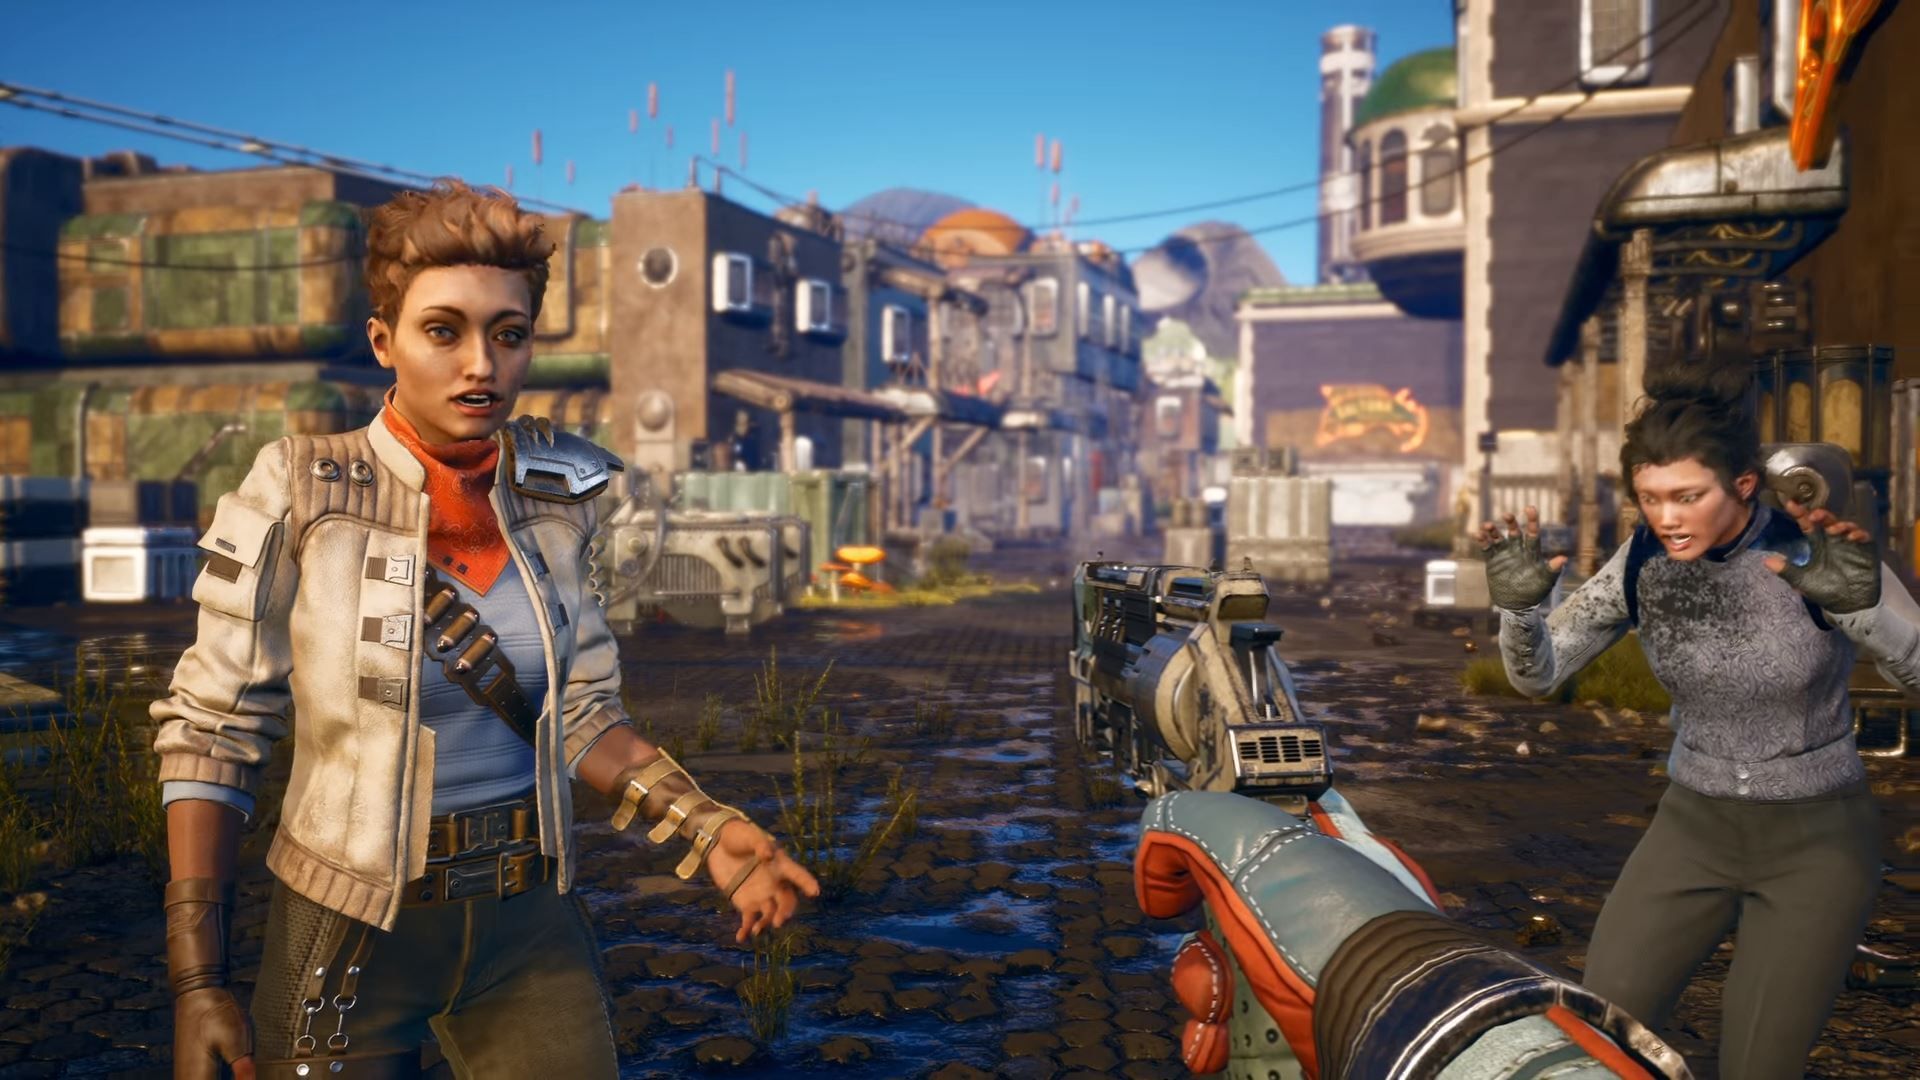 The Outer Worlds: Release Date, Trailer, and News. Den of Geek